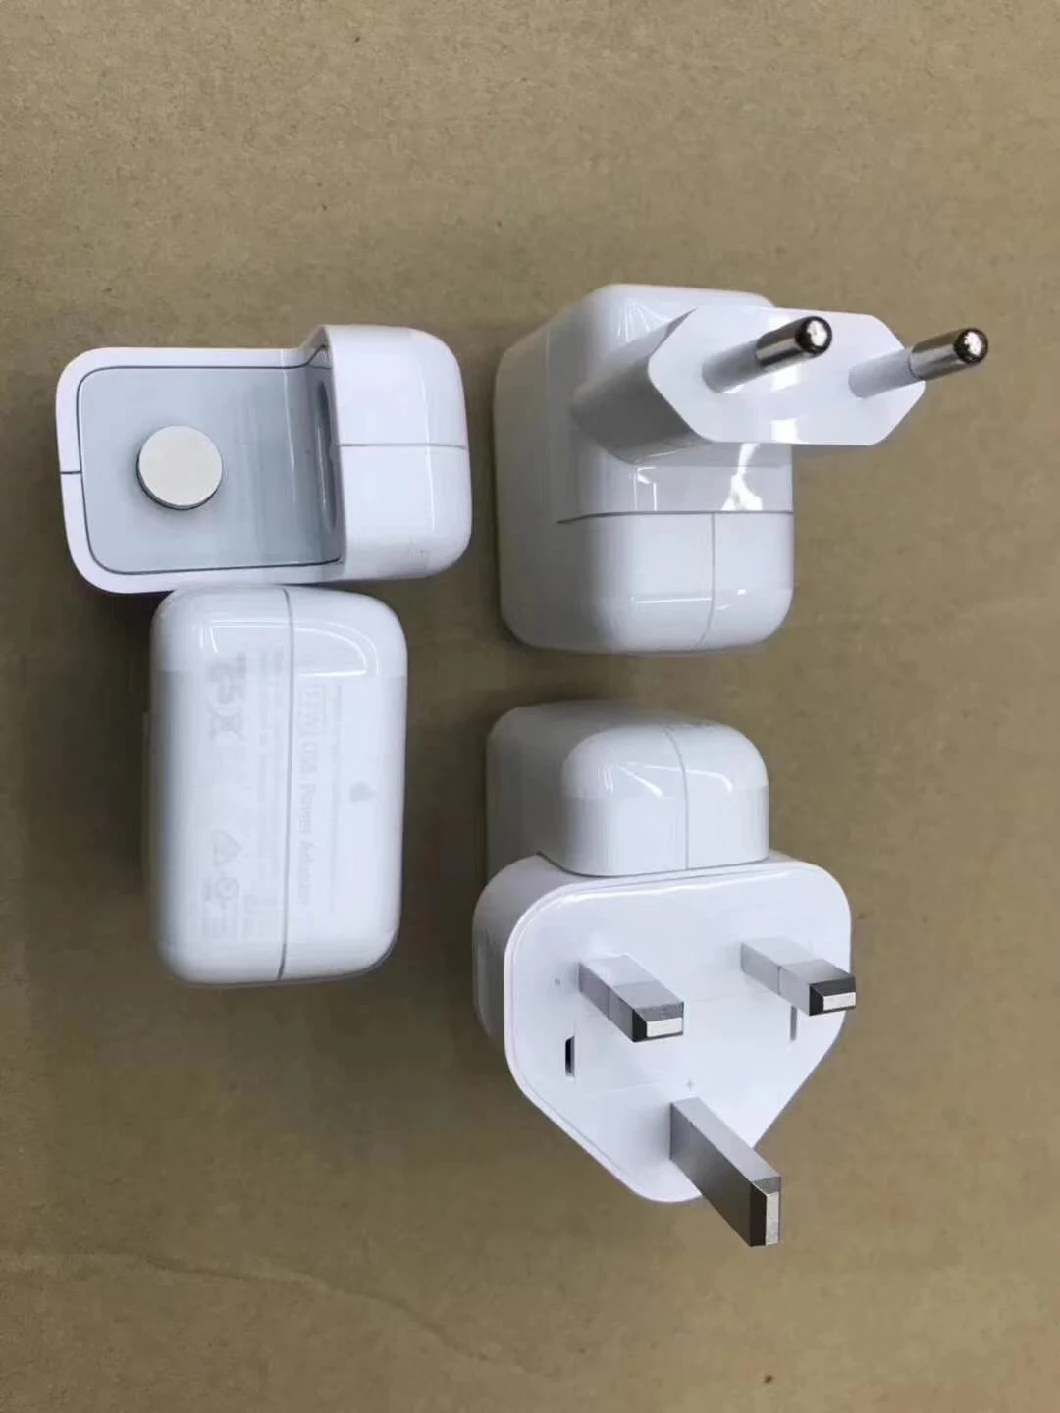 High Quality 12W USB Power Adapter Charger for iPhone iPad USB Wall Charger